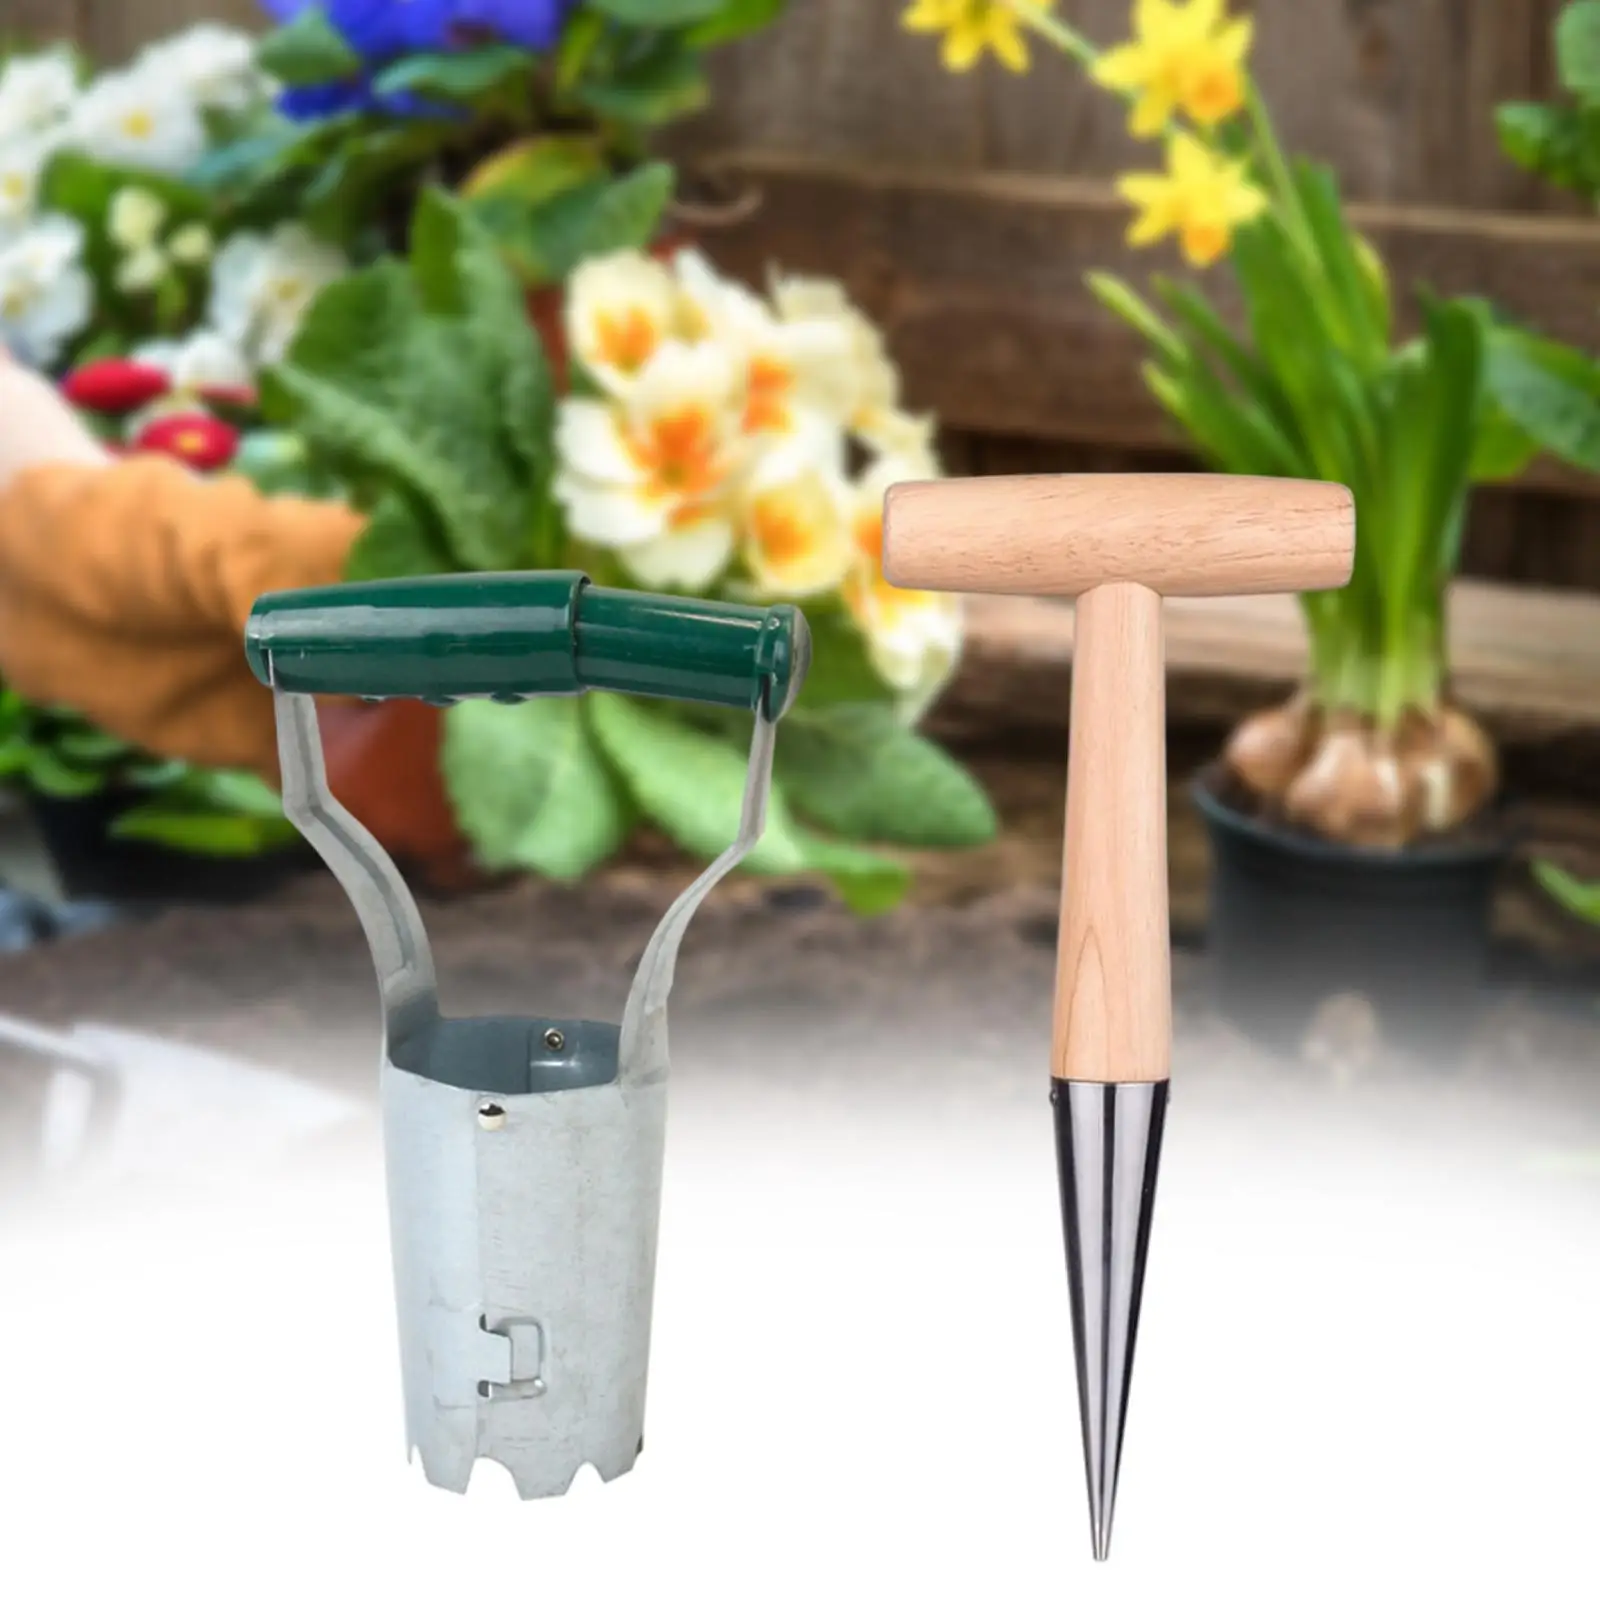 2x Planting Seeds and Bulb Tools Soil Insertion Flower Bulb Planting Sowing